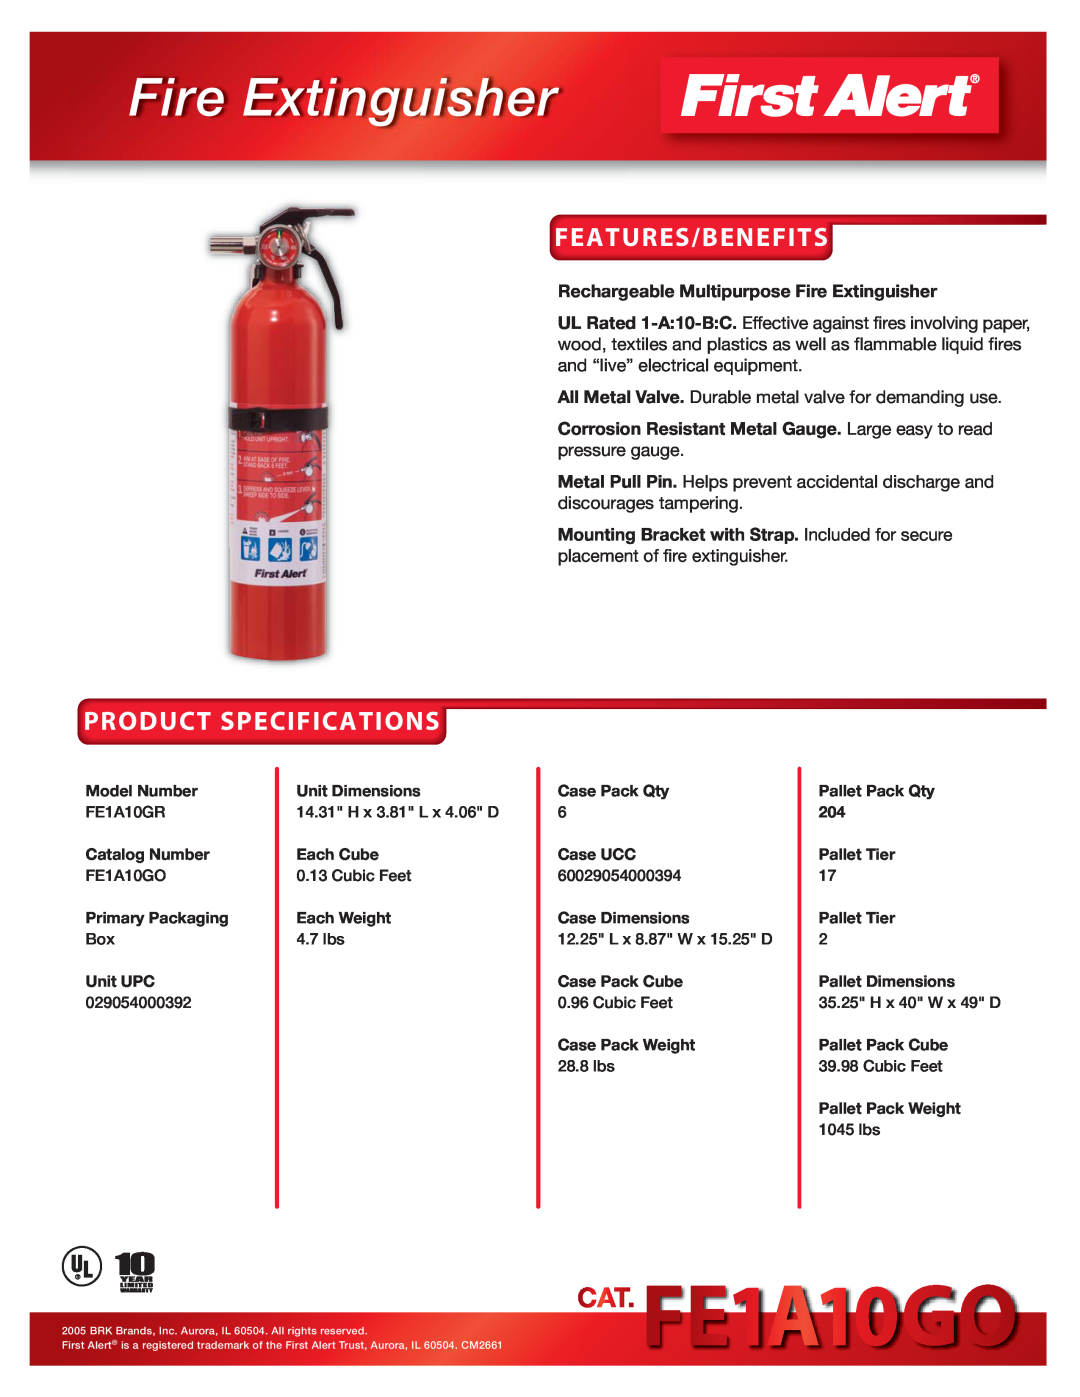 BRK electronic FE1A10GO specifications Fire Extinguisher, Features/Benefits, Product Specifications 